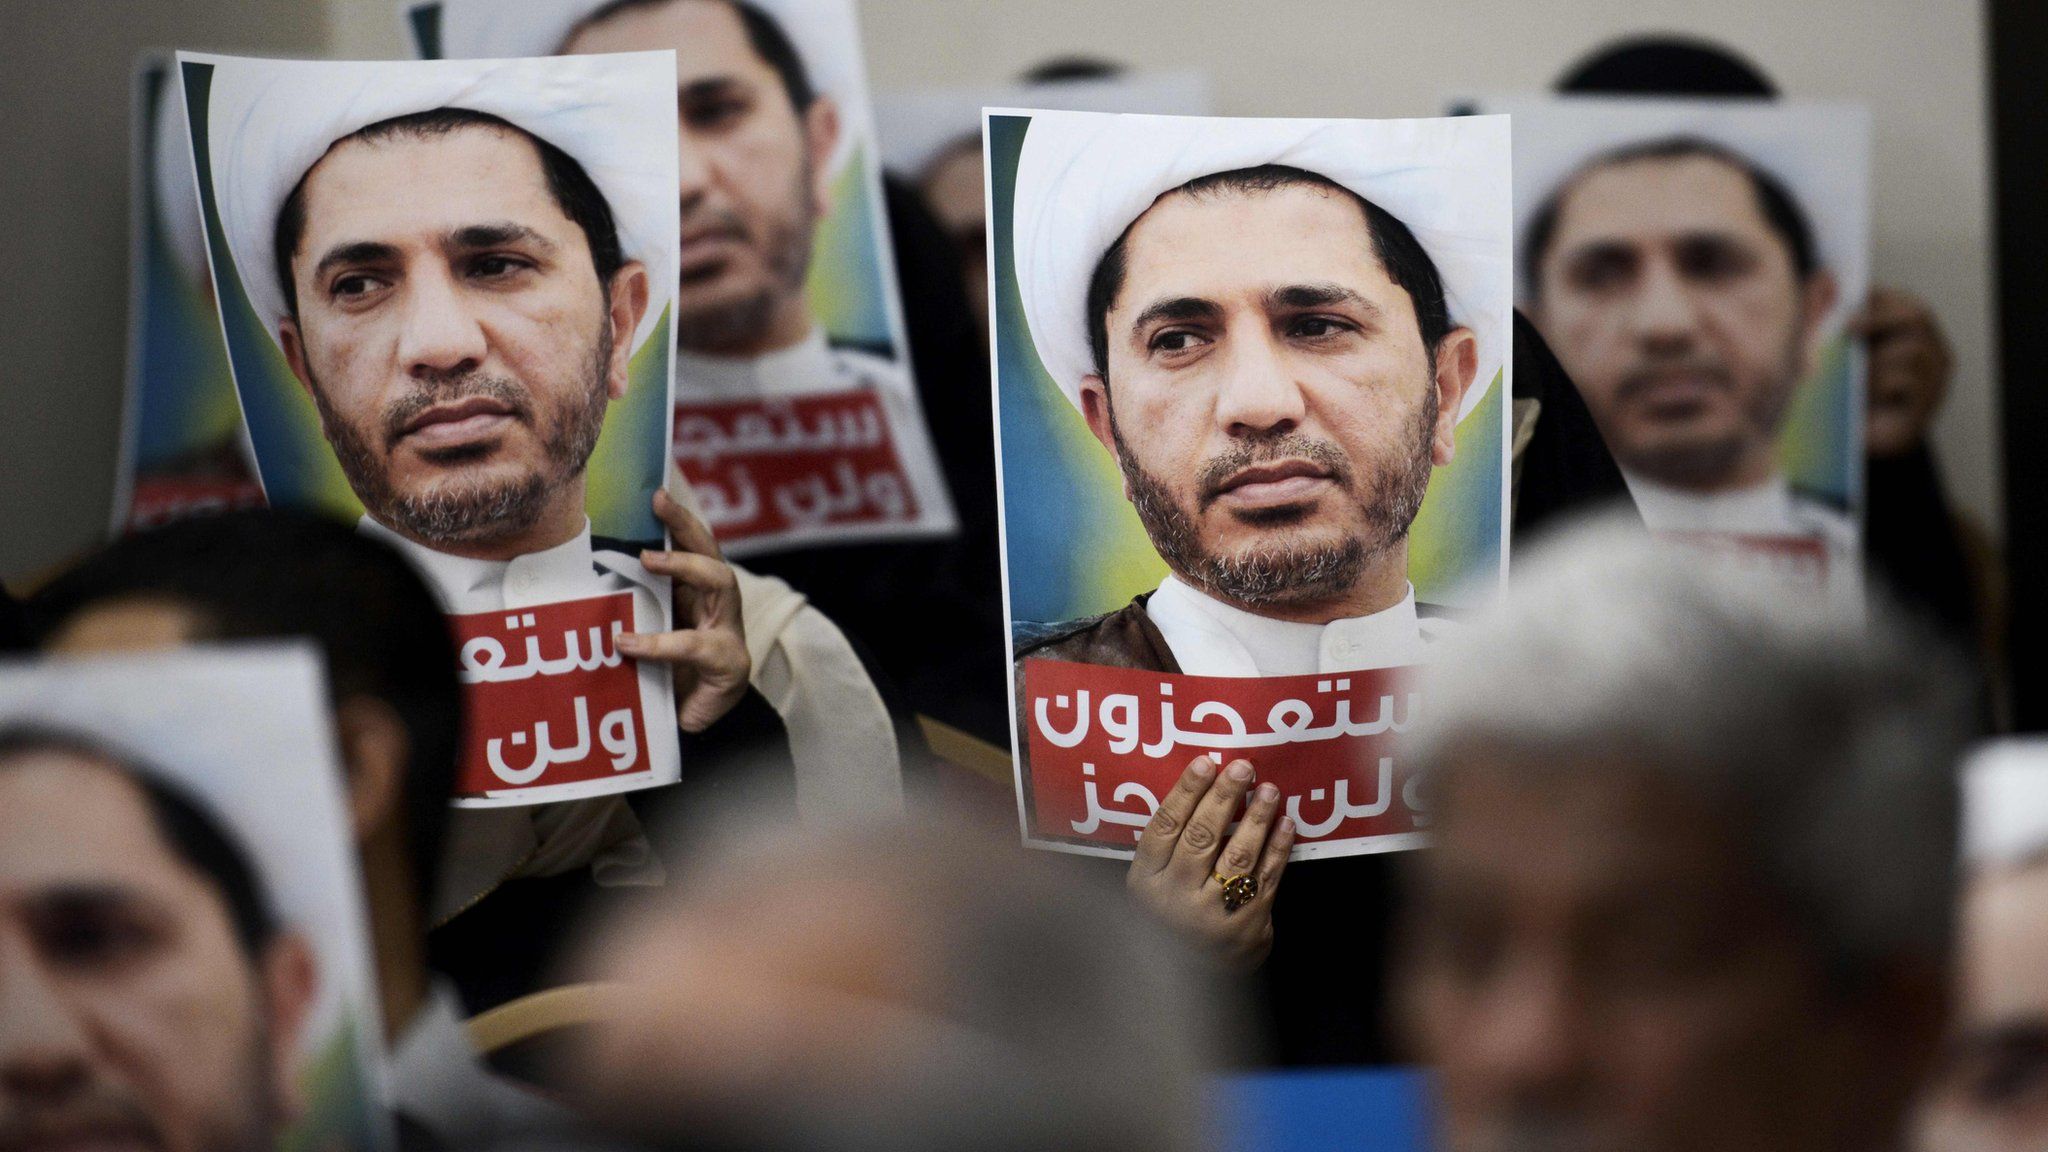 Wefaq supporters hold up posters of Sheikh Ali Salman at a protest in Zinj, Bahrain (29 May 2016)